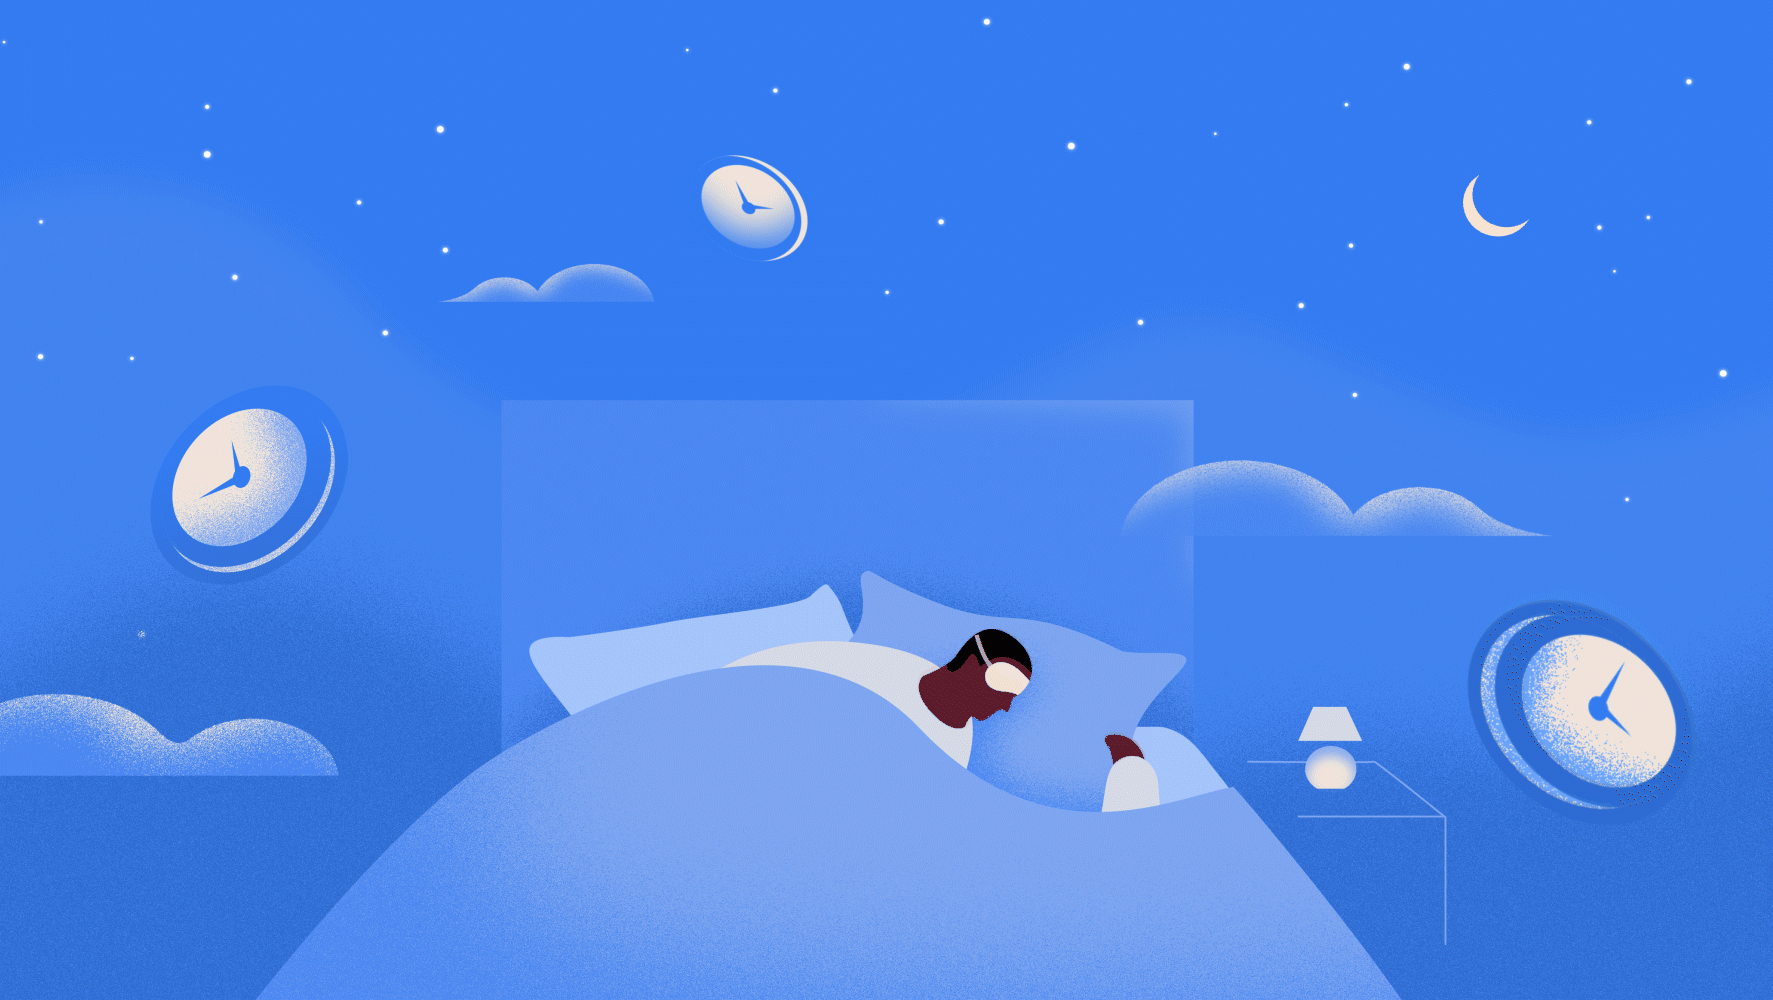 A cartoon of a person sleeping in bed with a blue night sky behind them and floating clocks in the sky